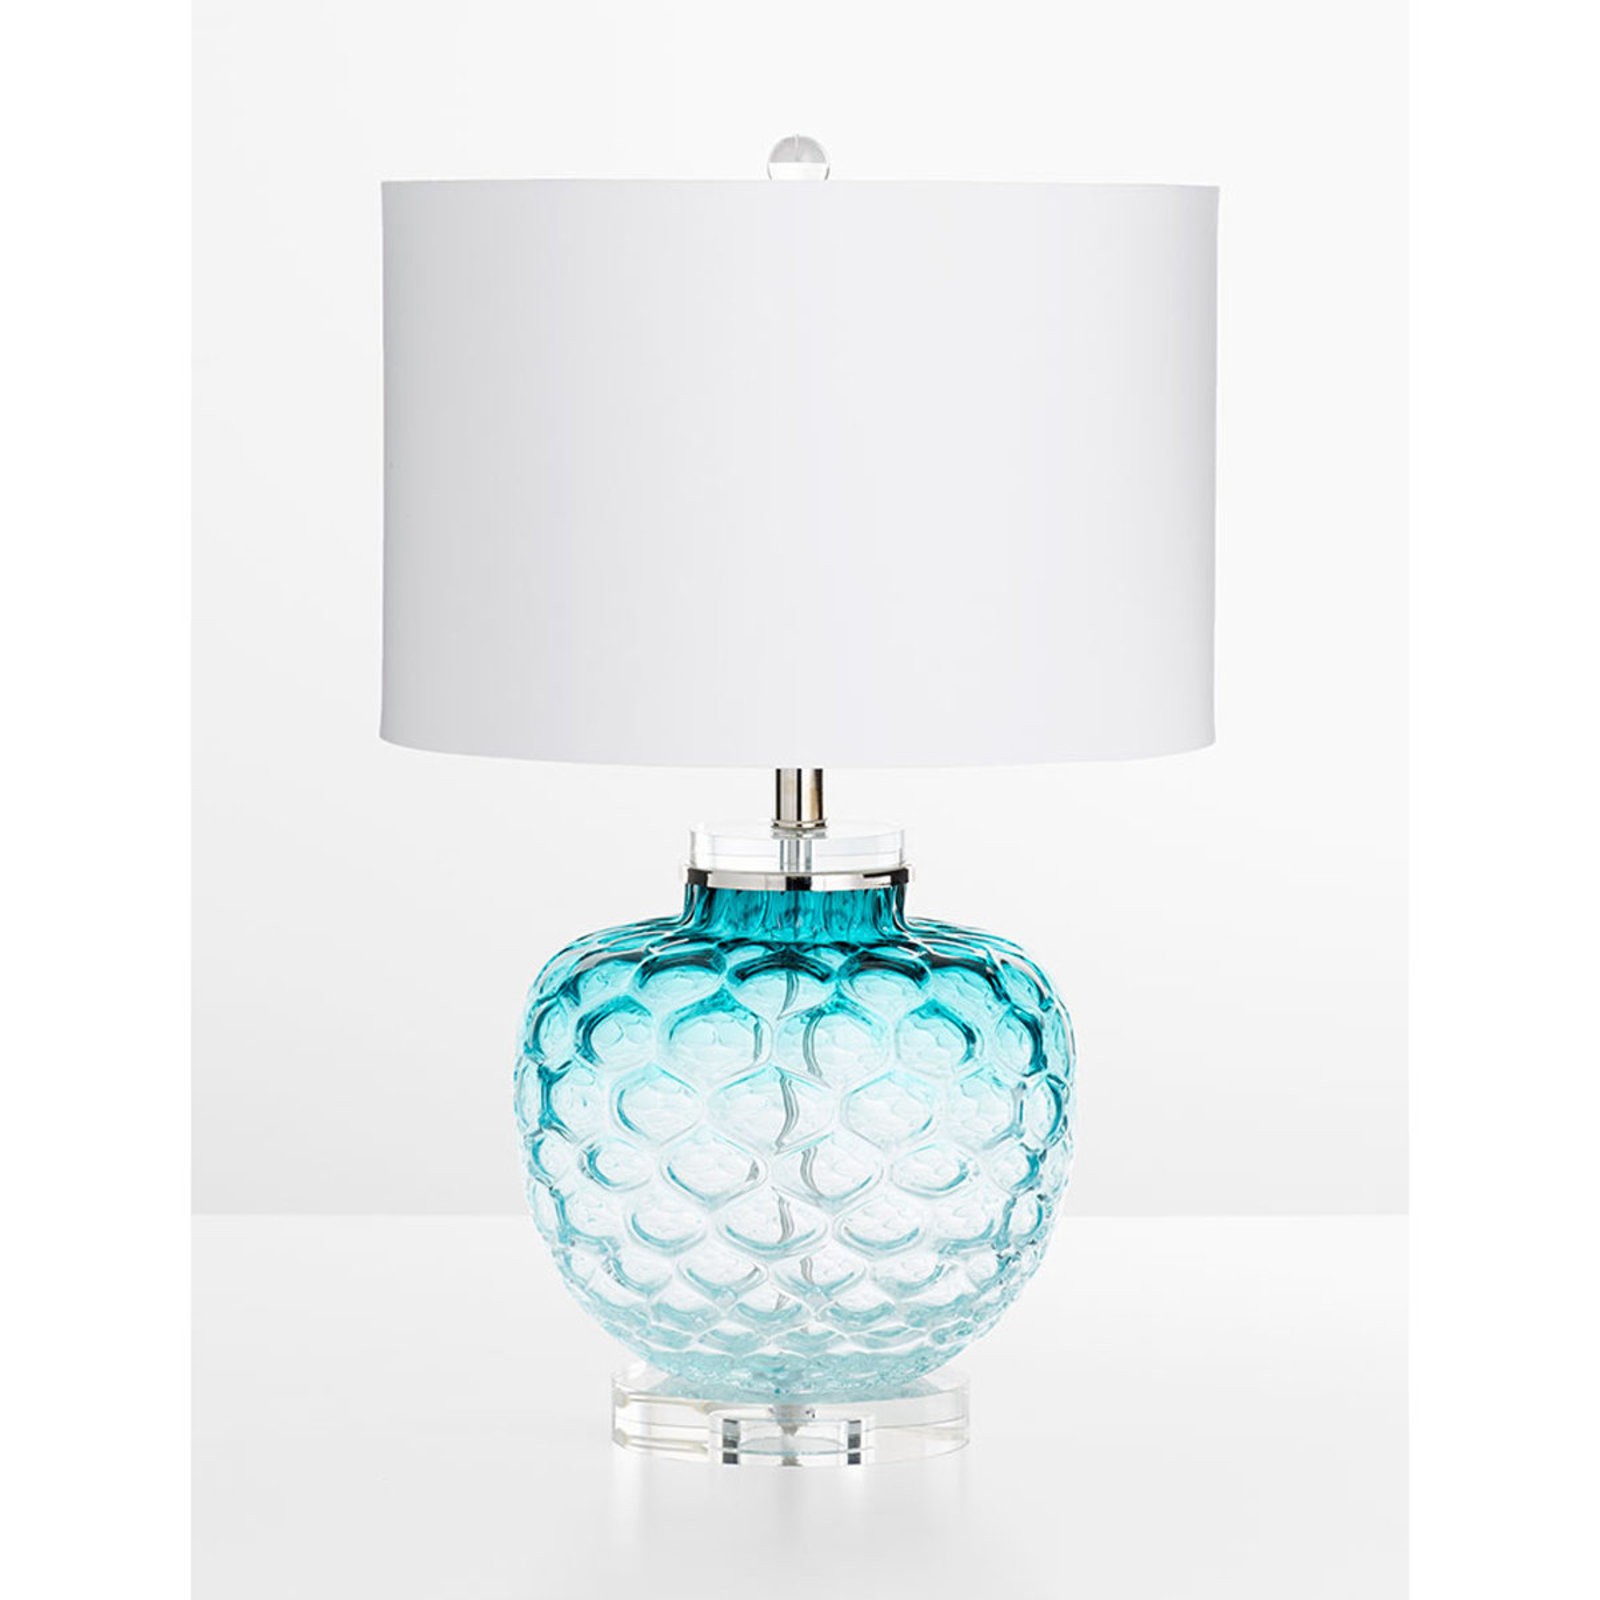 Under the sea glass table lamp shades of light